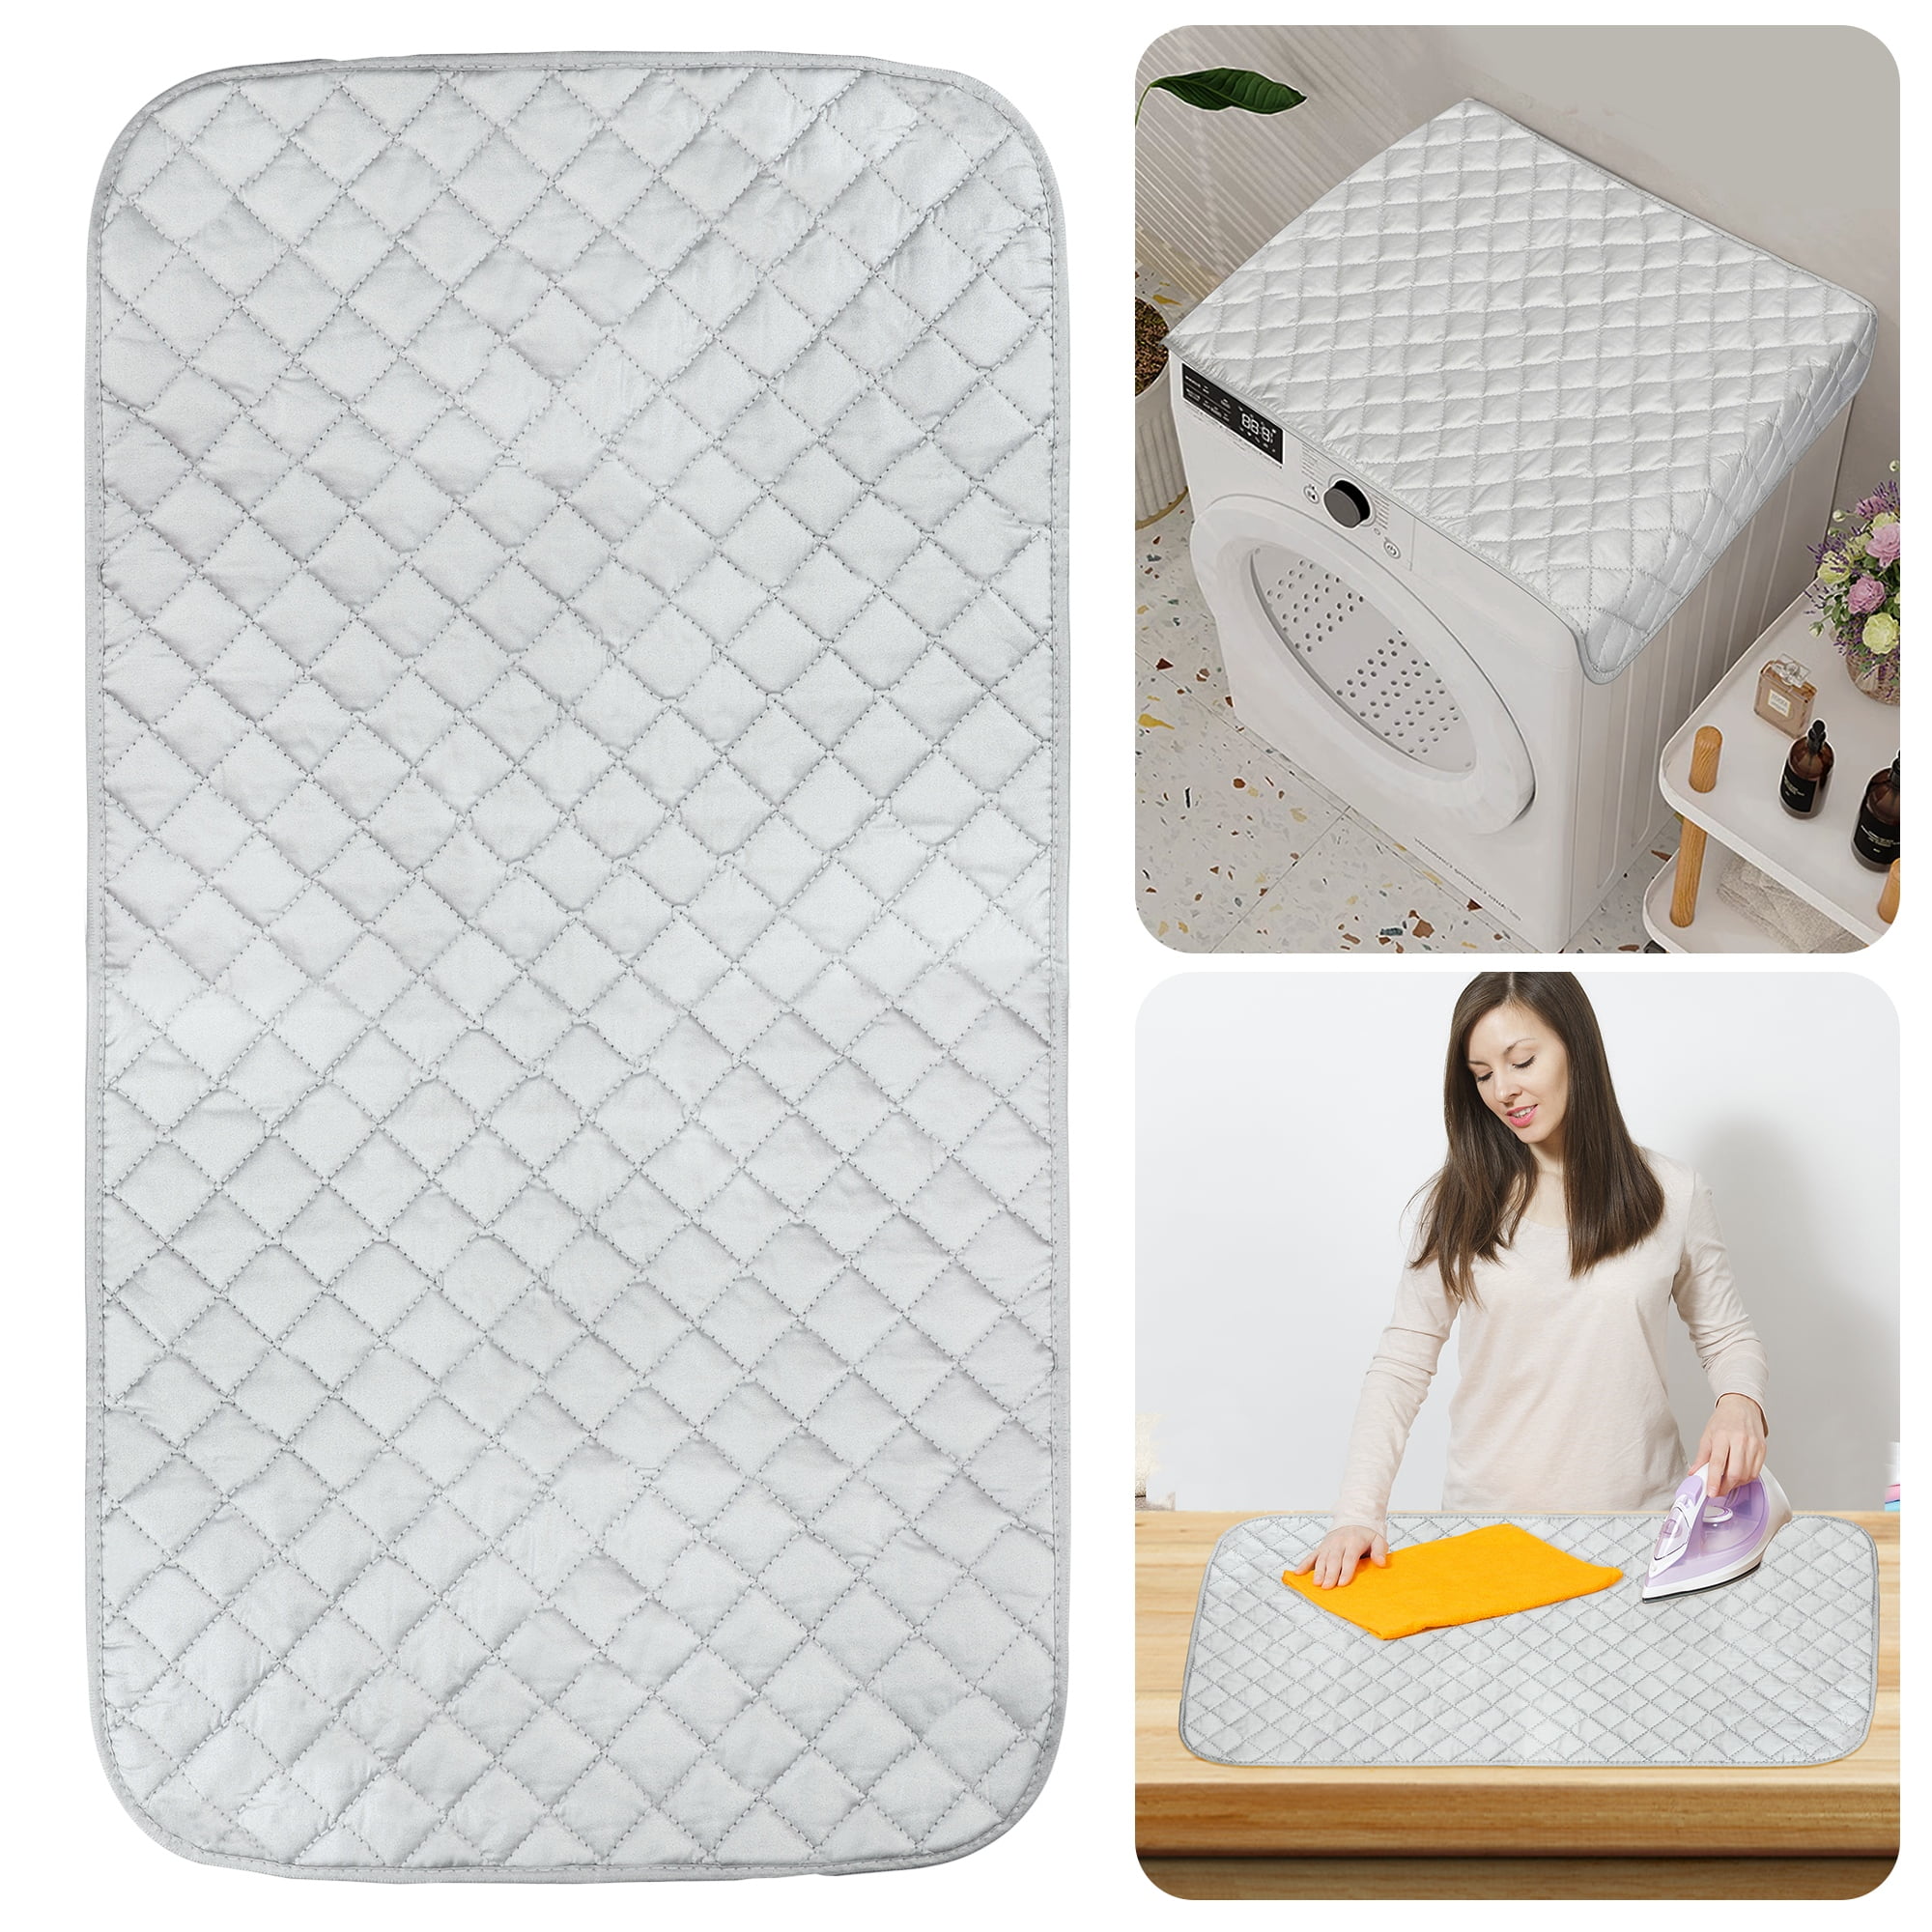 Buy Portable Ironing Mat Pad Compact Iron Board Magnetic Dryer Washer Table  Anywhere Online